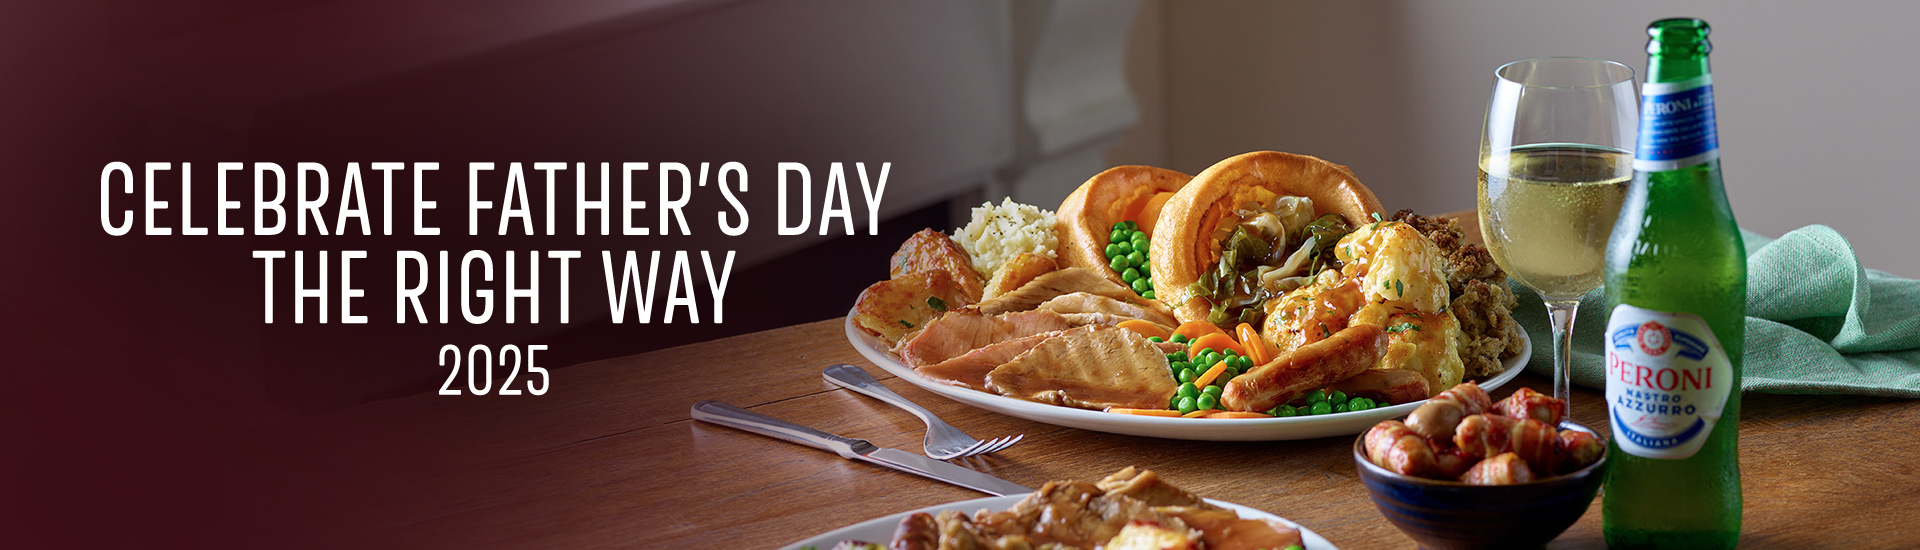 Father’s day carvery in Brentwood